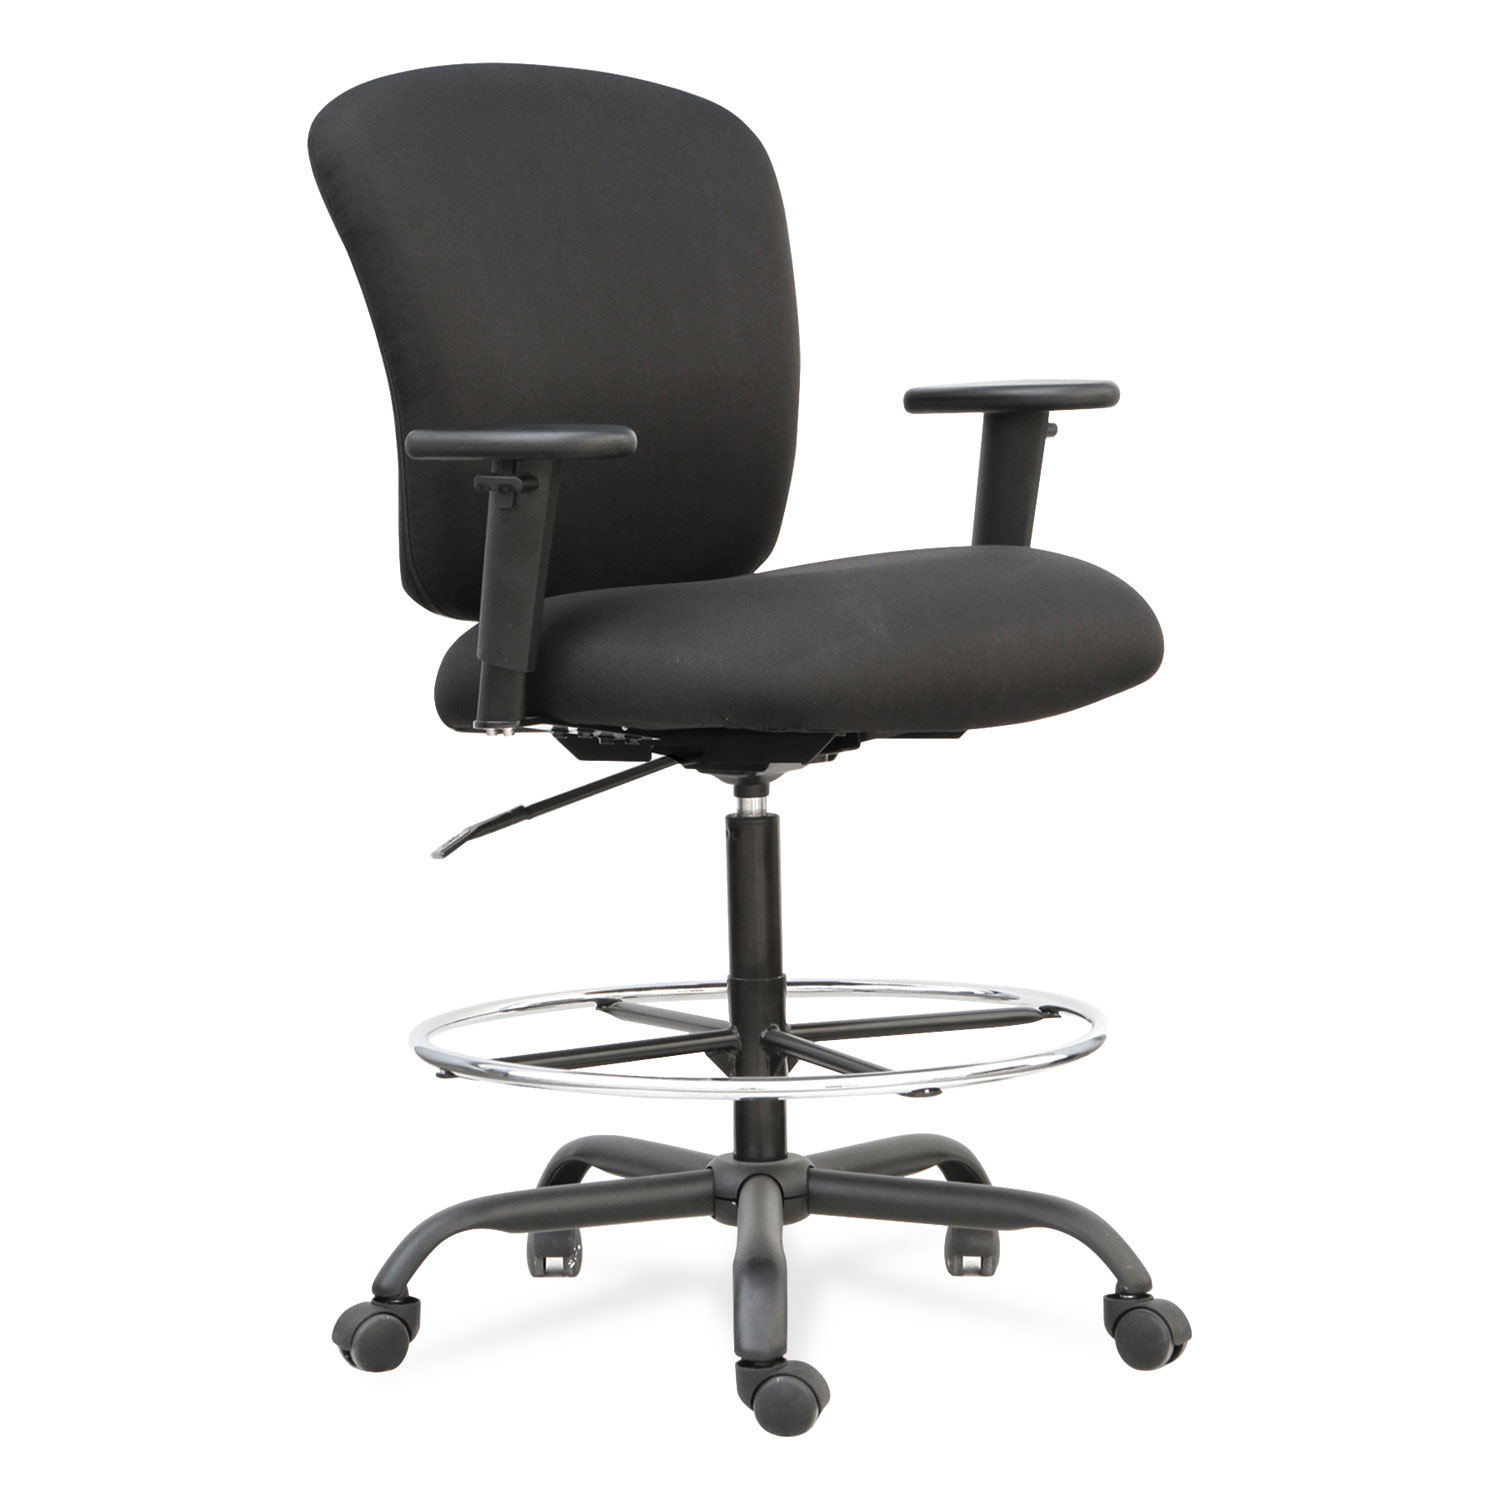  Alera ALEMT4610 Alera Mota Series Big and Tall Stool, 32.67 Seat Height, Supports up to 450 lbs., Black Seat/Black Back, Black Base (ALEMT4610) 